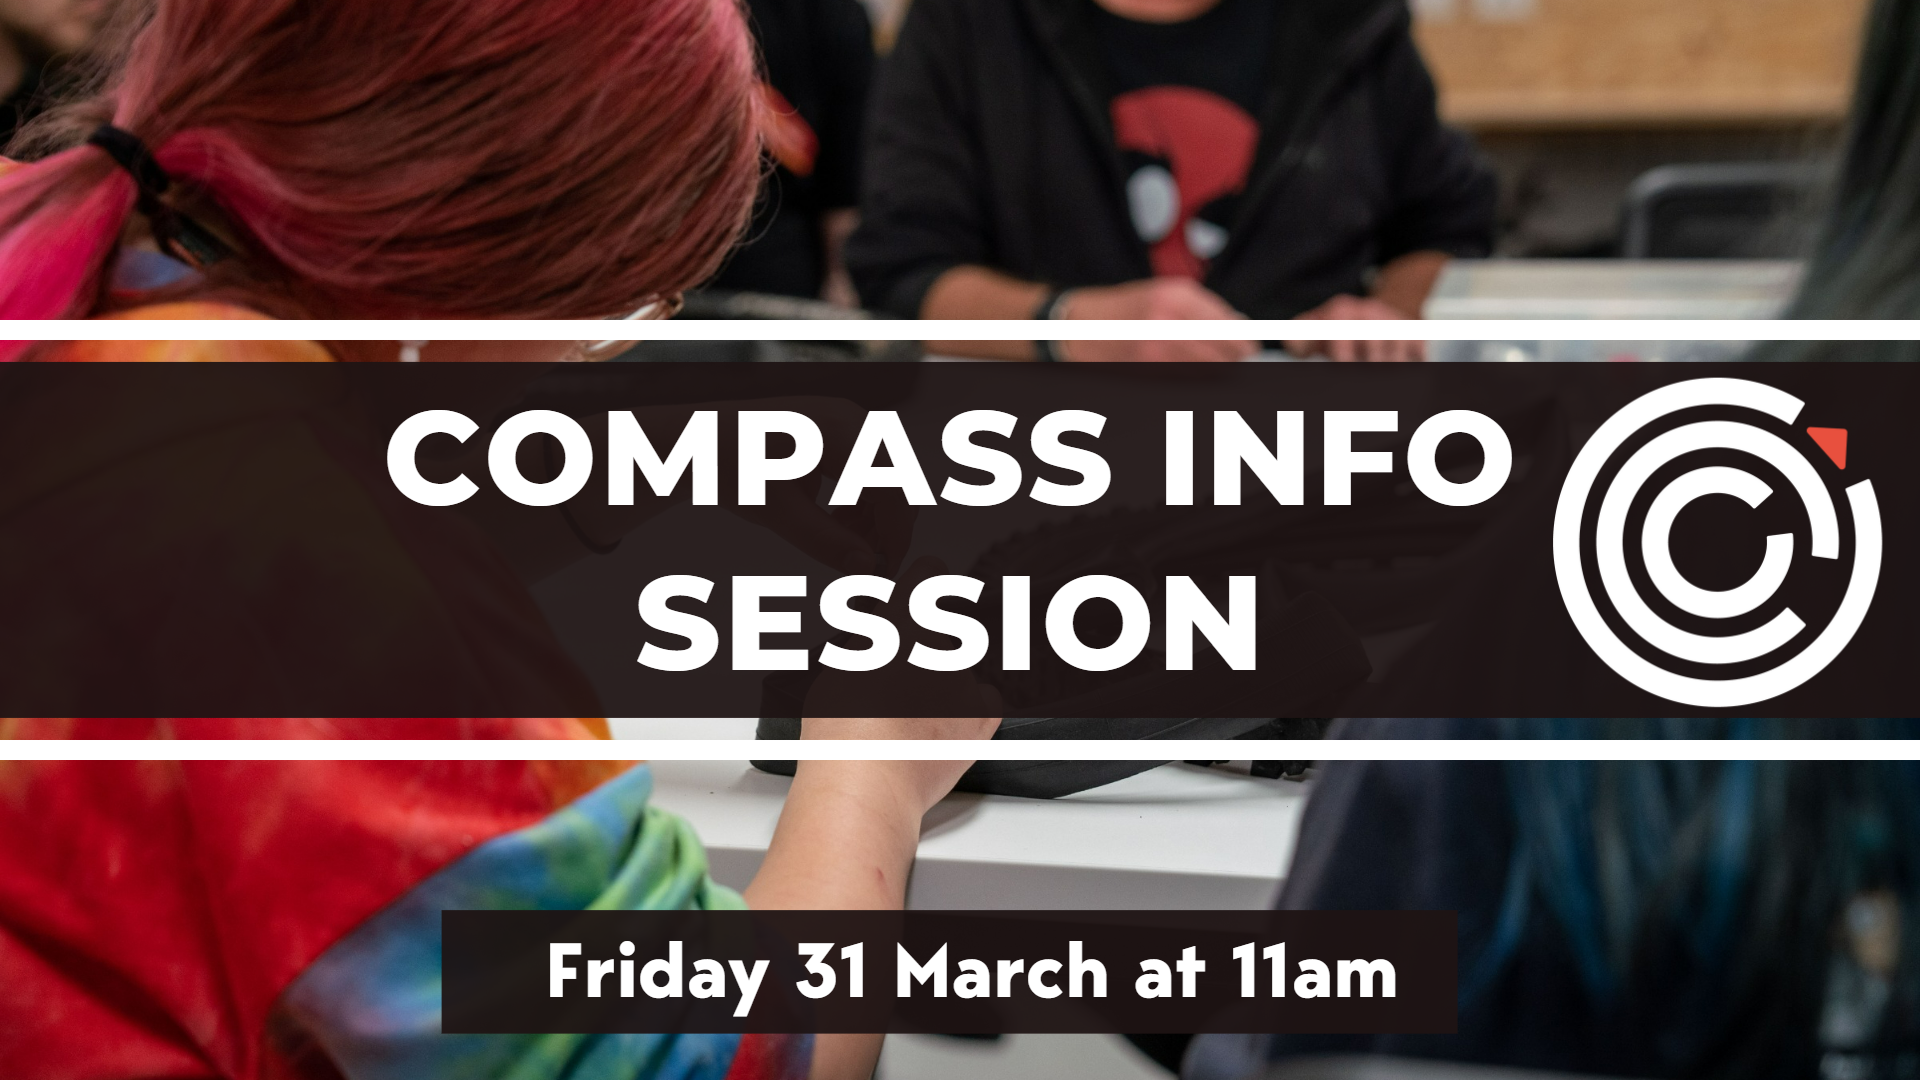 Compass Info Session Friday 31 March